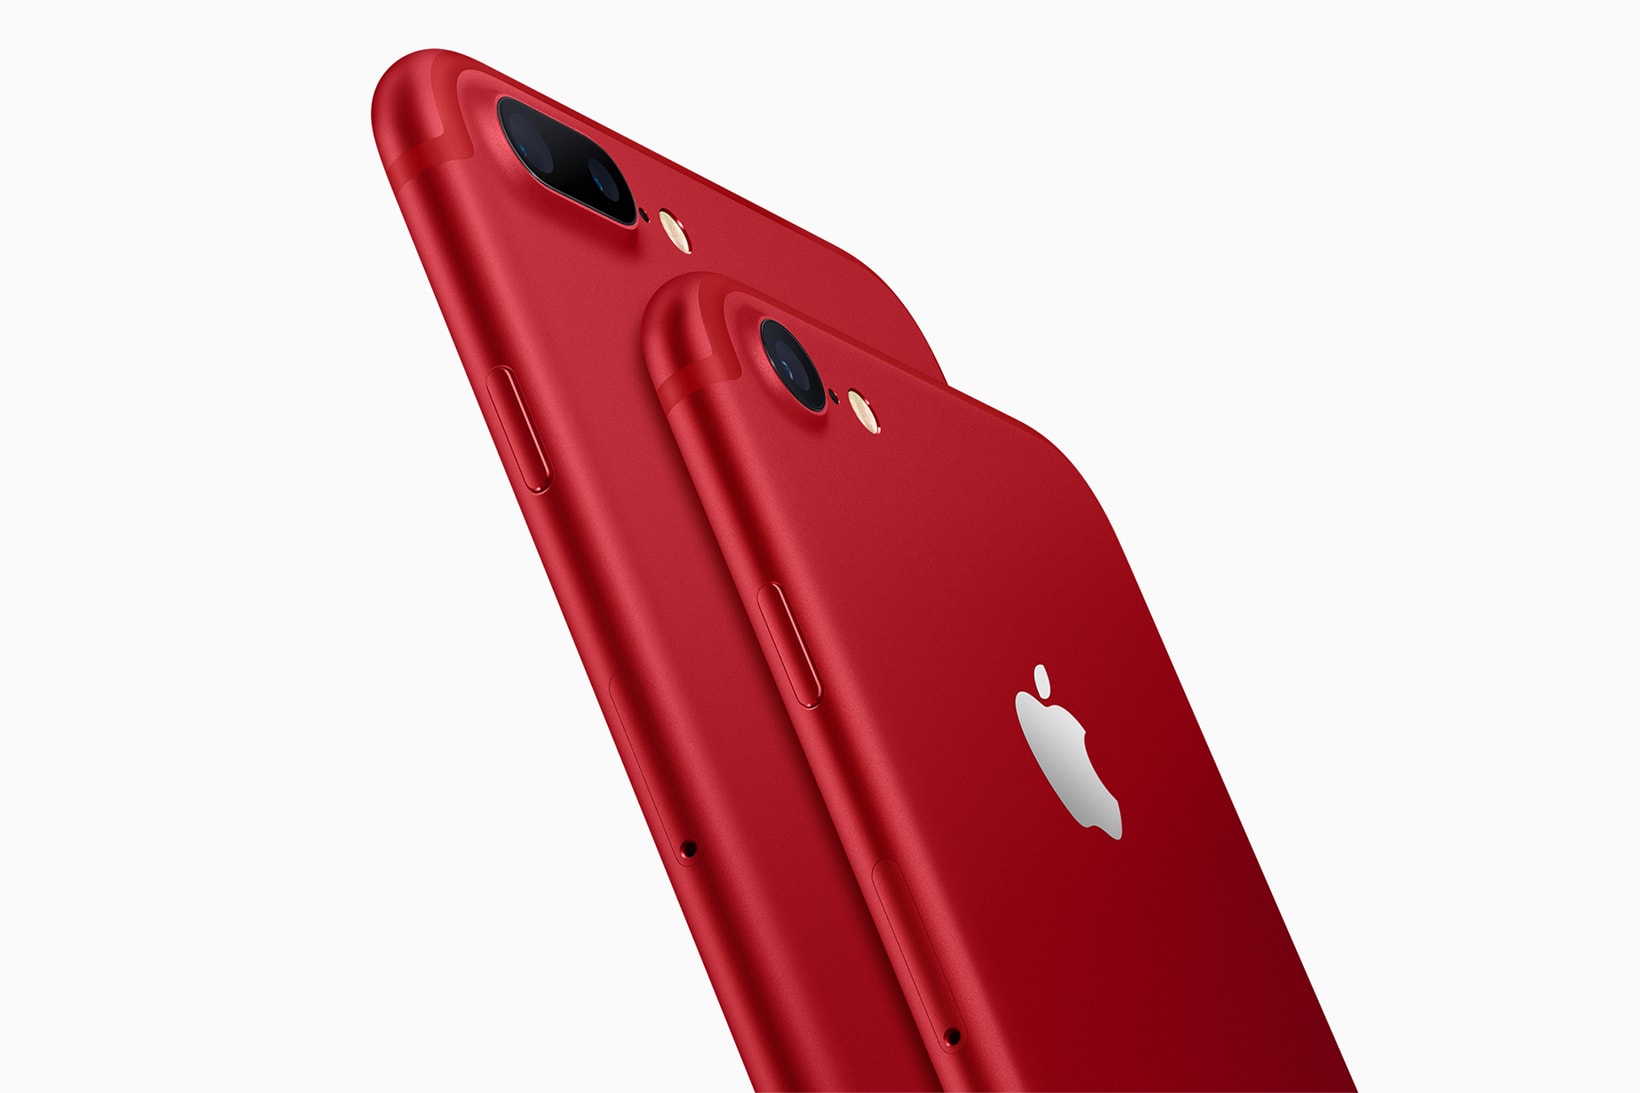 Apple PRODUCT RED iPhone 7 Plus